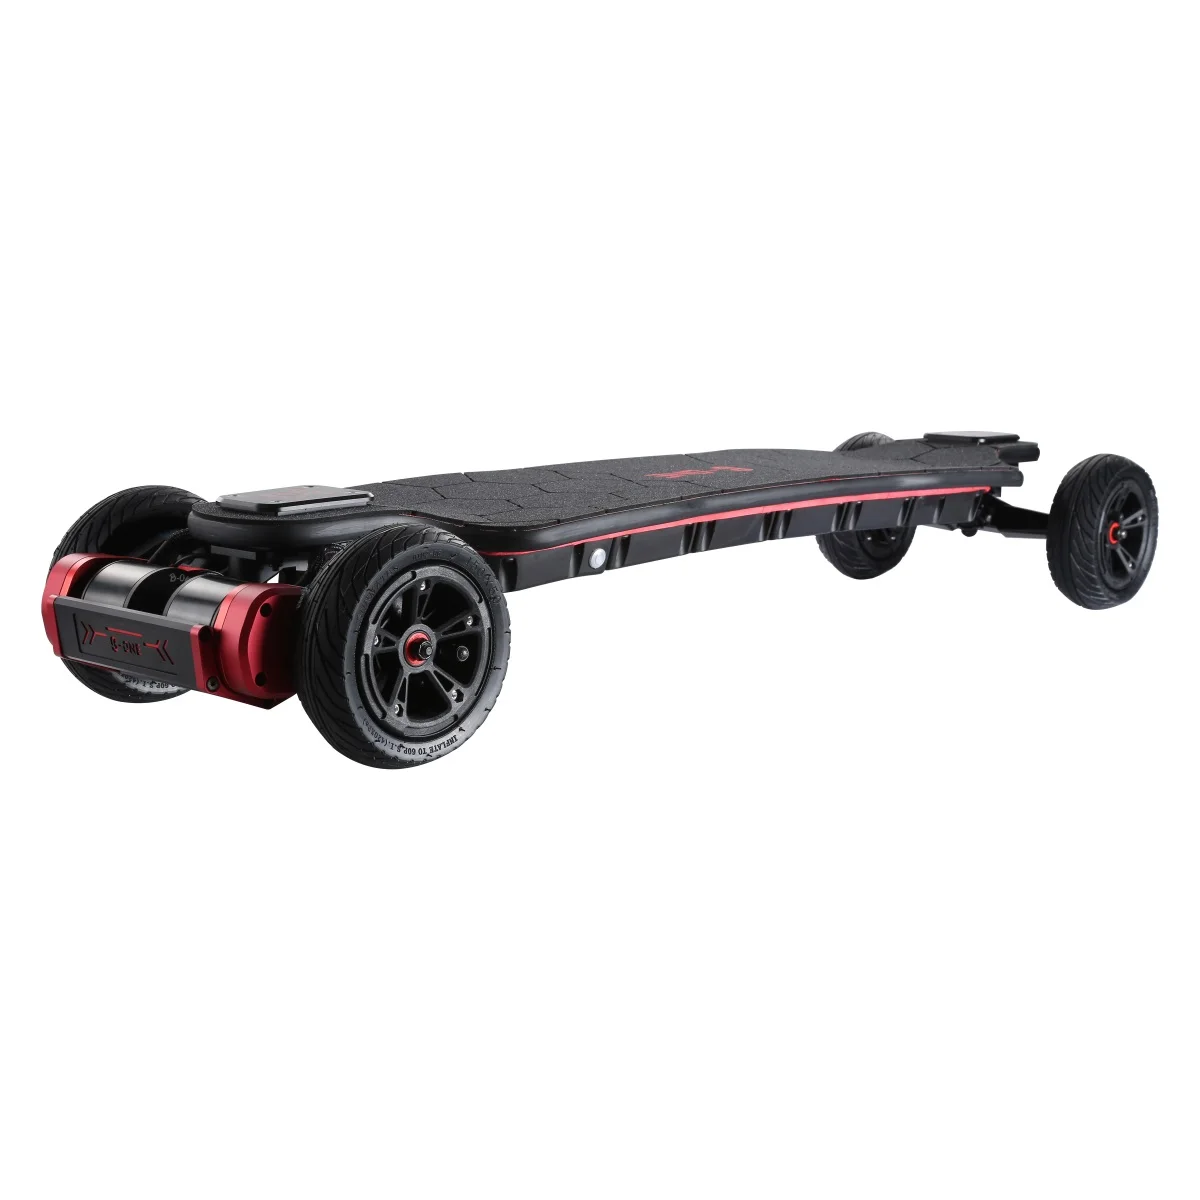 B-one Balrog Bamboo All Terrain Electric Skateboard with Integrated Tail Light